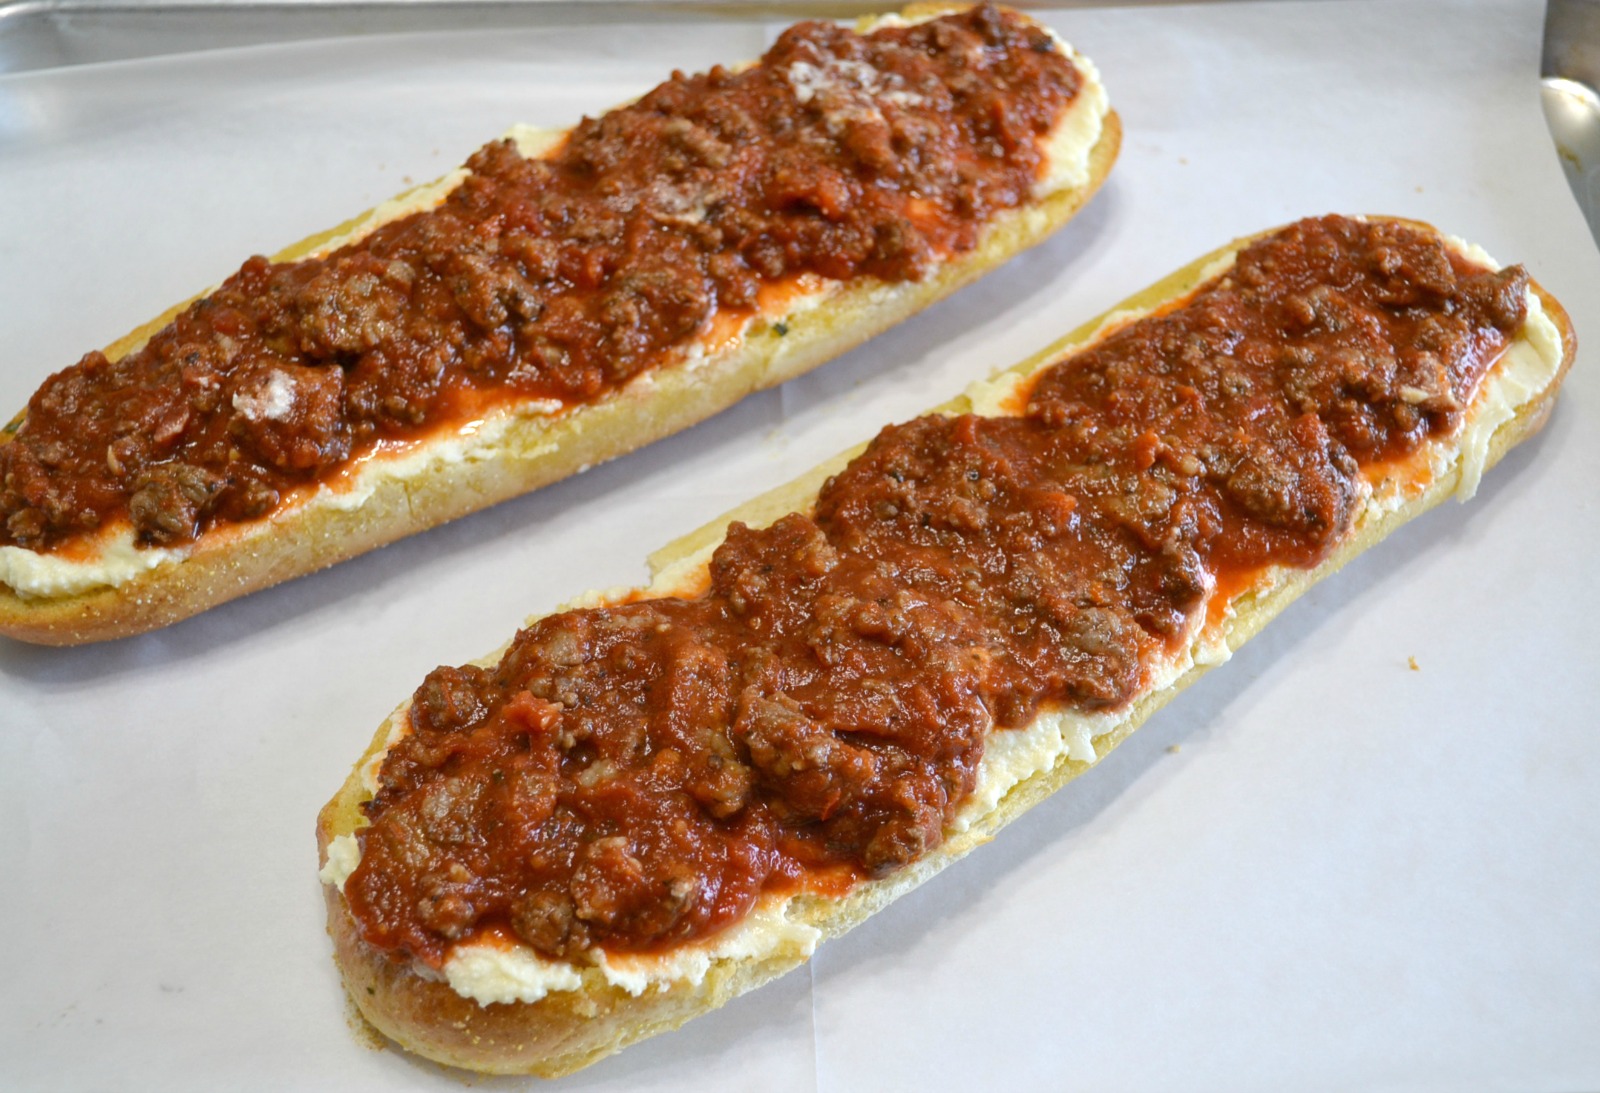 Loaves of garlic bread topped with a ricotta cheese layer, a meat sauce, and lots of melted mozzarella cheese. Perfect for dinner or cut into smaller pieces as an appetizer.